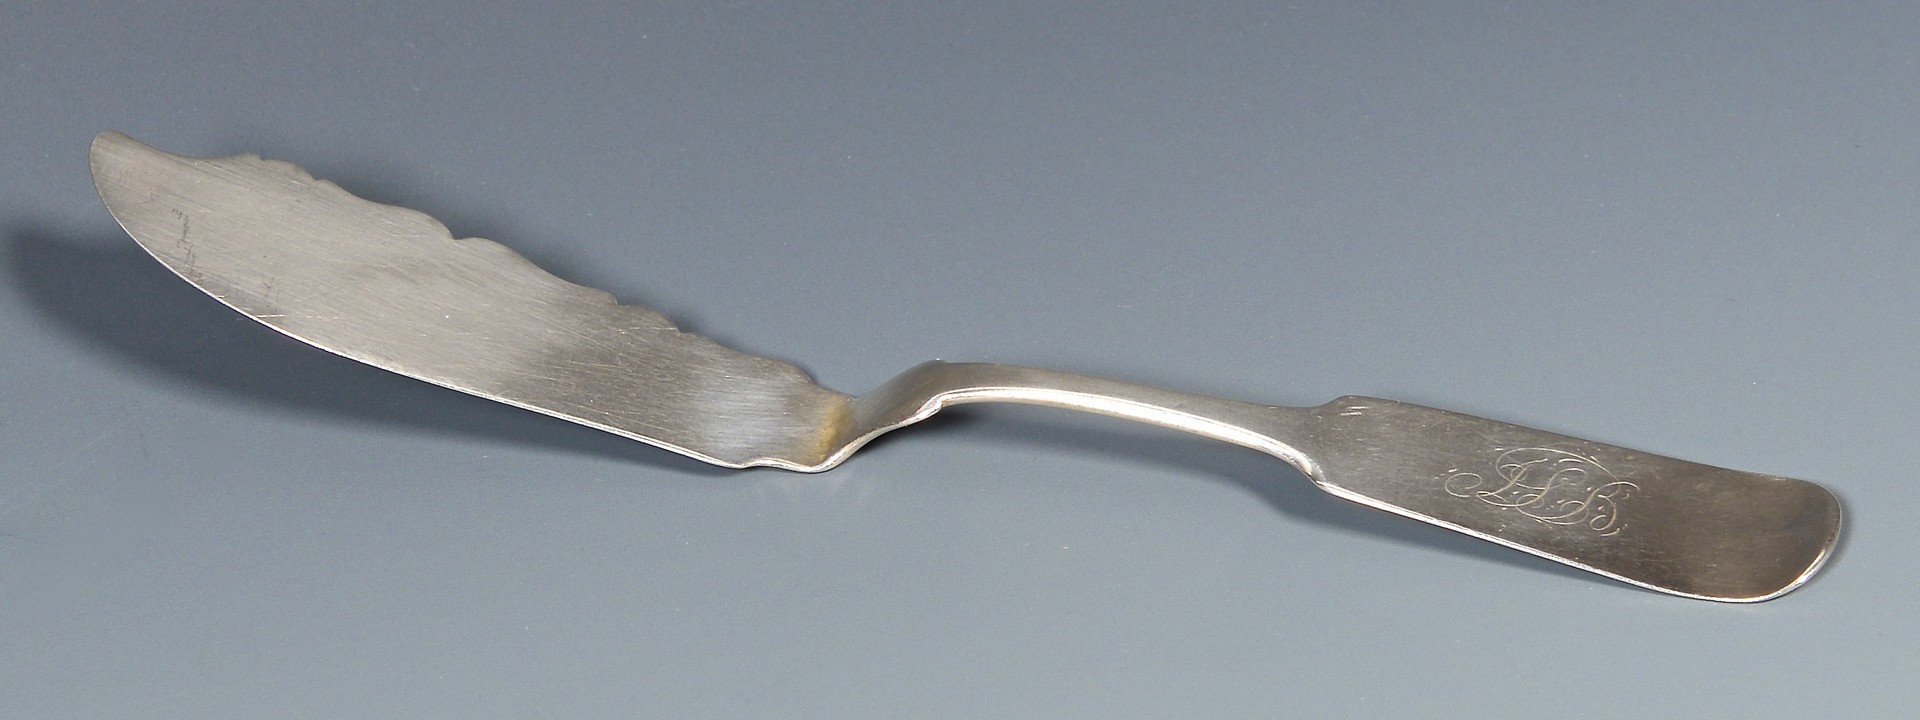 Lot 57: Conning Mobile Silver Ladle and knife